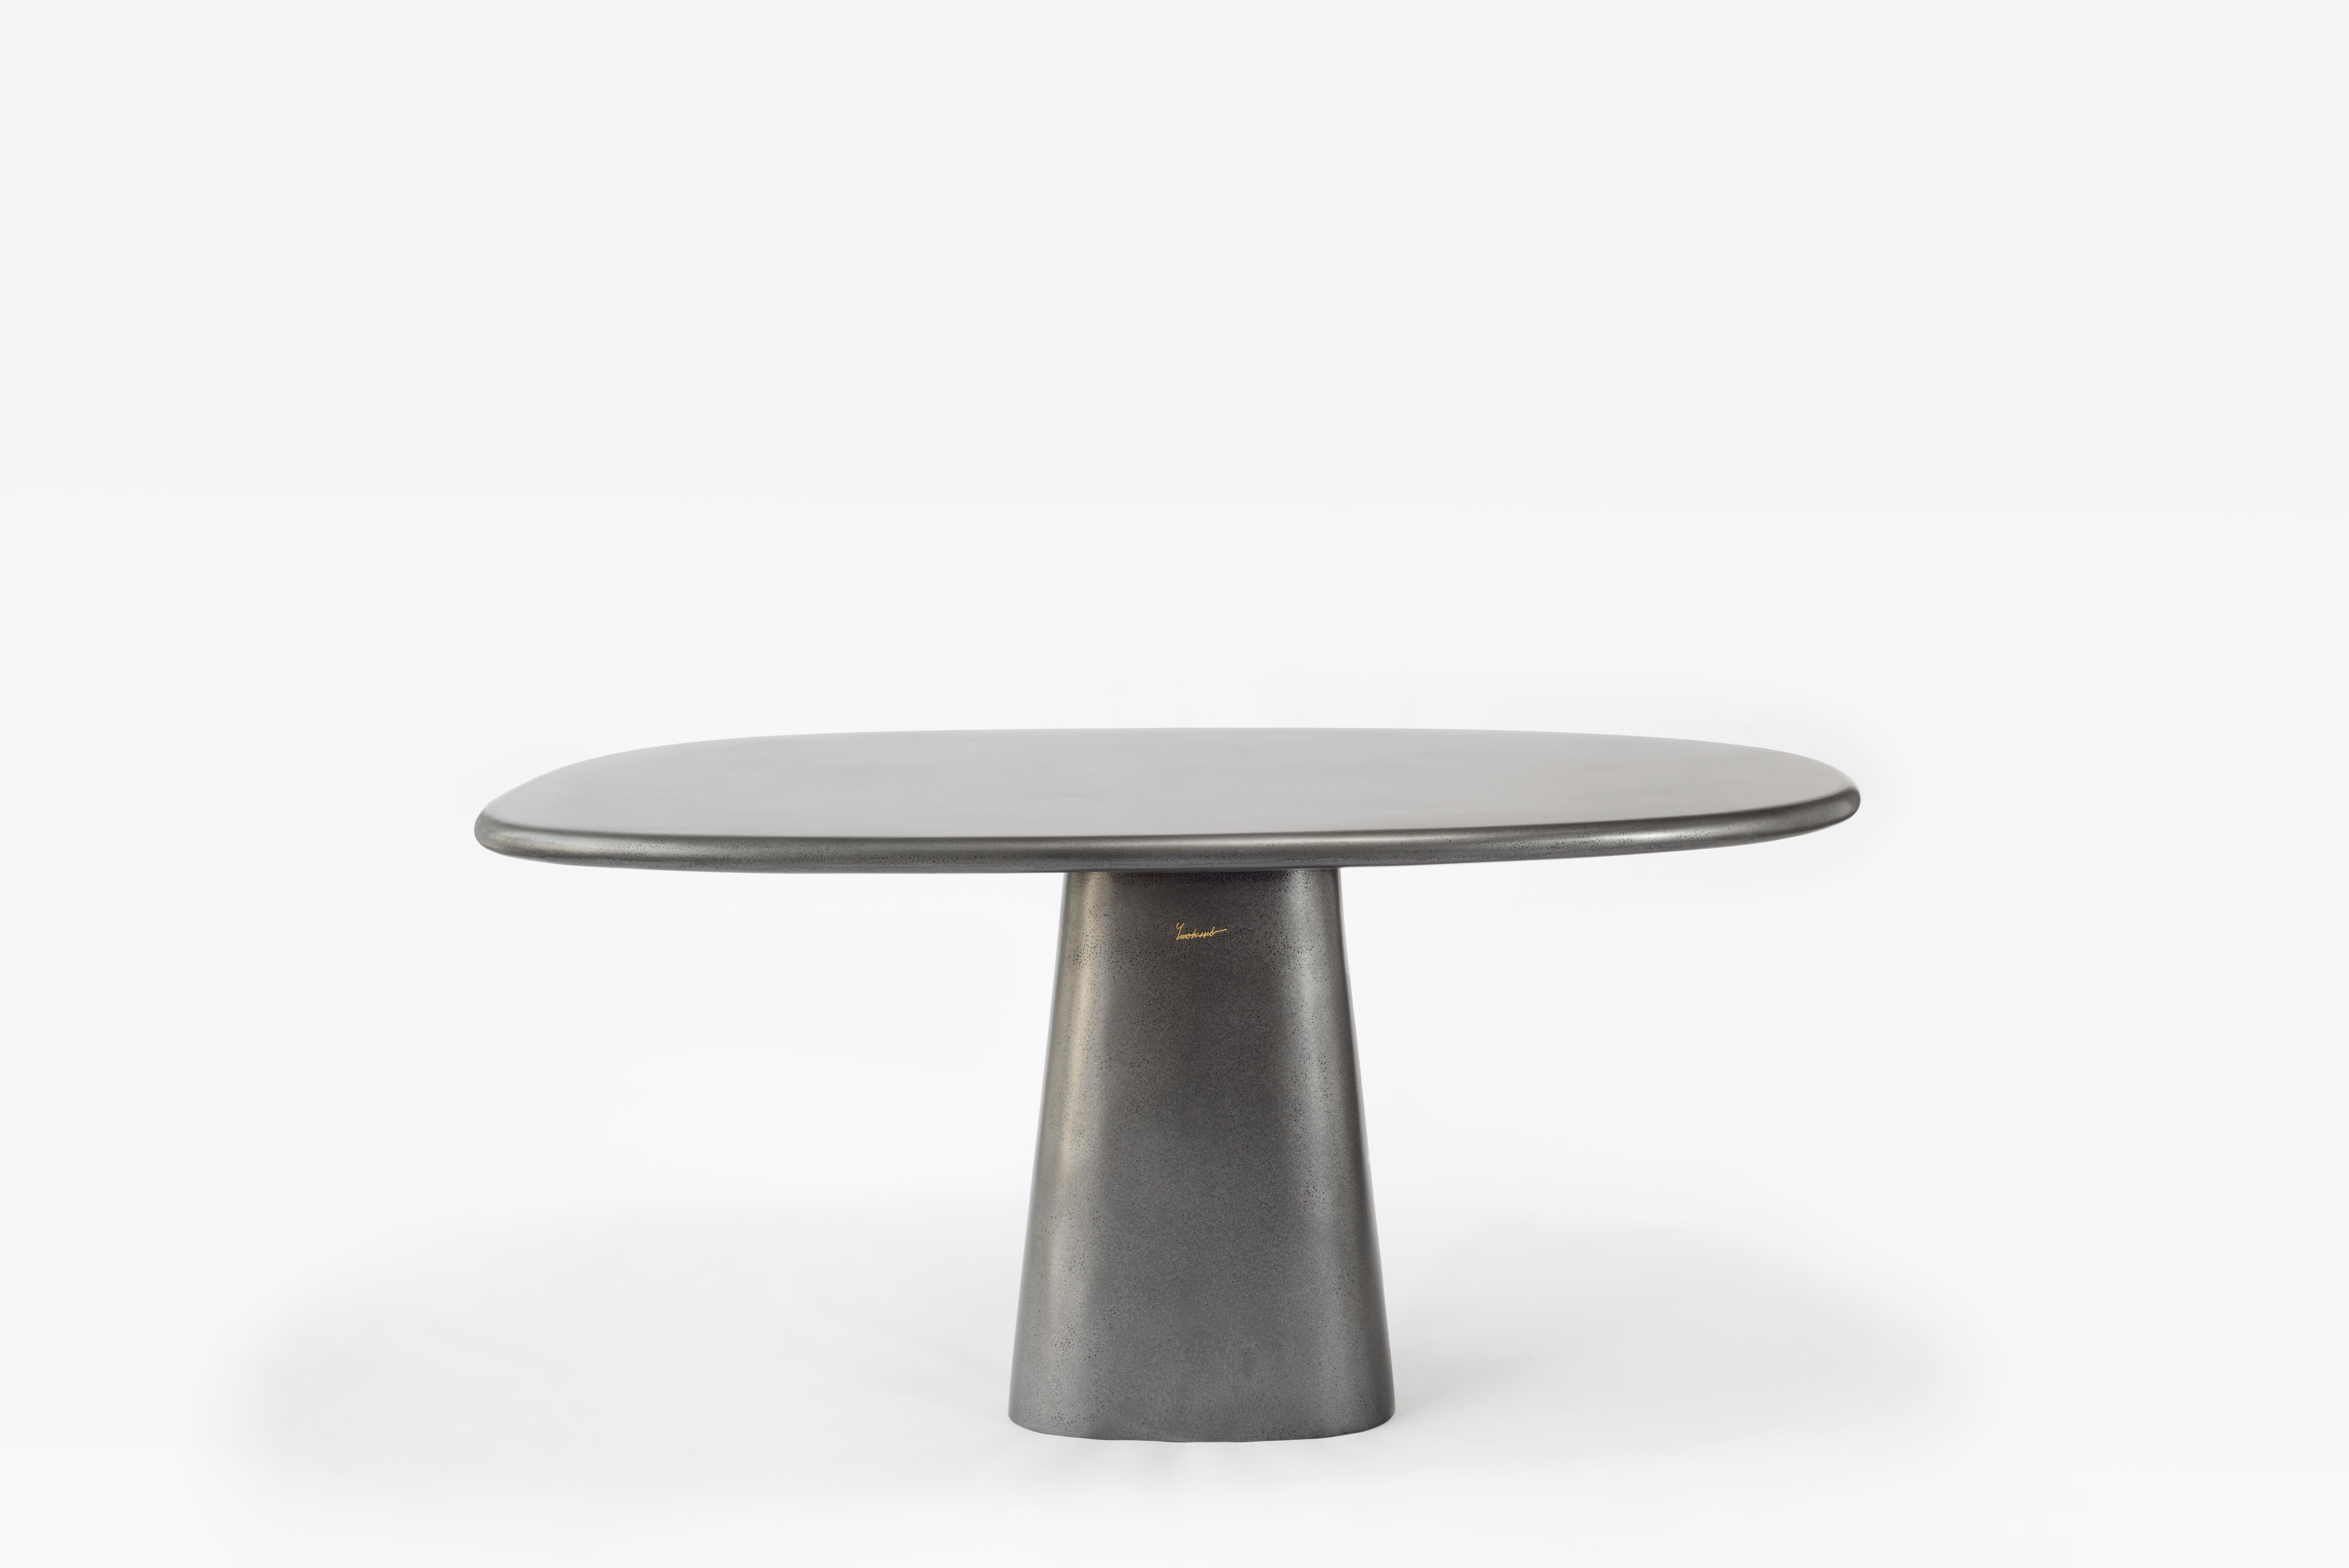 Distortion, Georges Mohasseb Design, 2022
A series of low tables inspired by the distortion present in nature, the idea behind this table is to challenge an organic flat surface on a single leg, creating a natural and minimal balance.